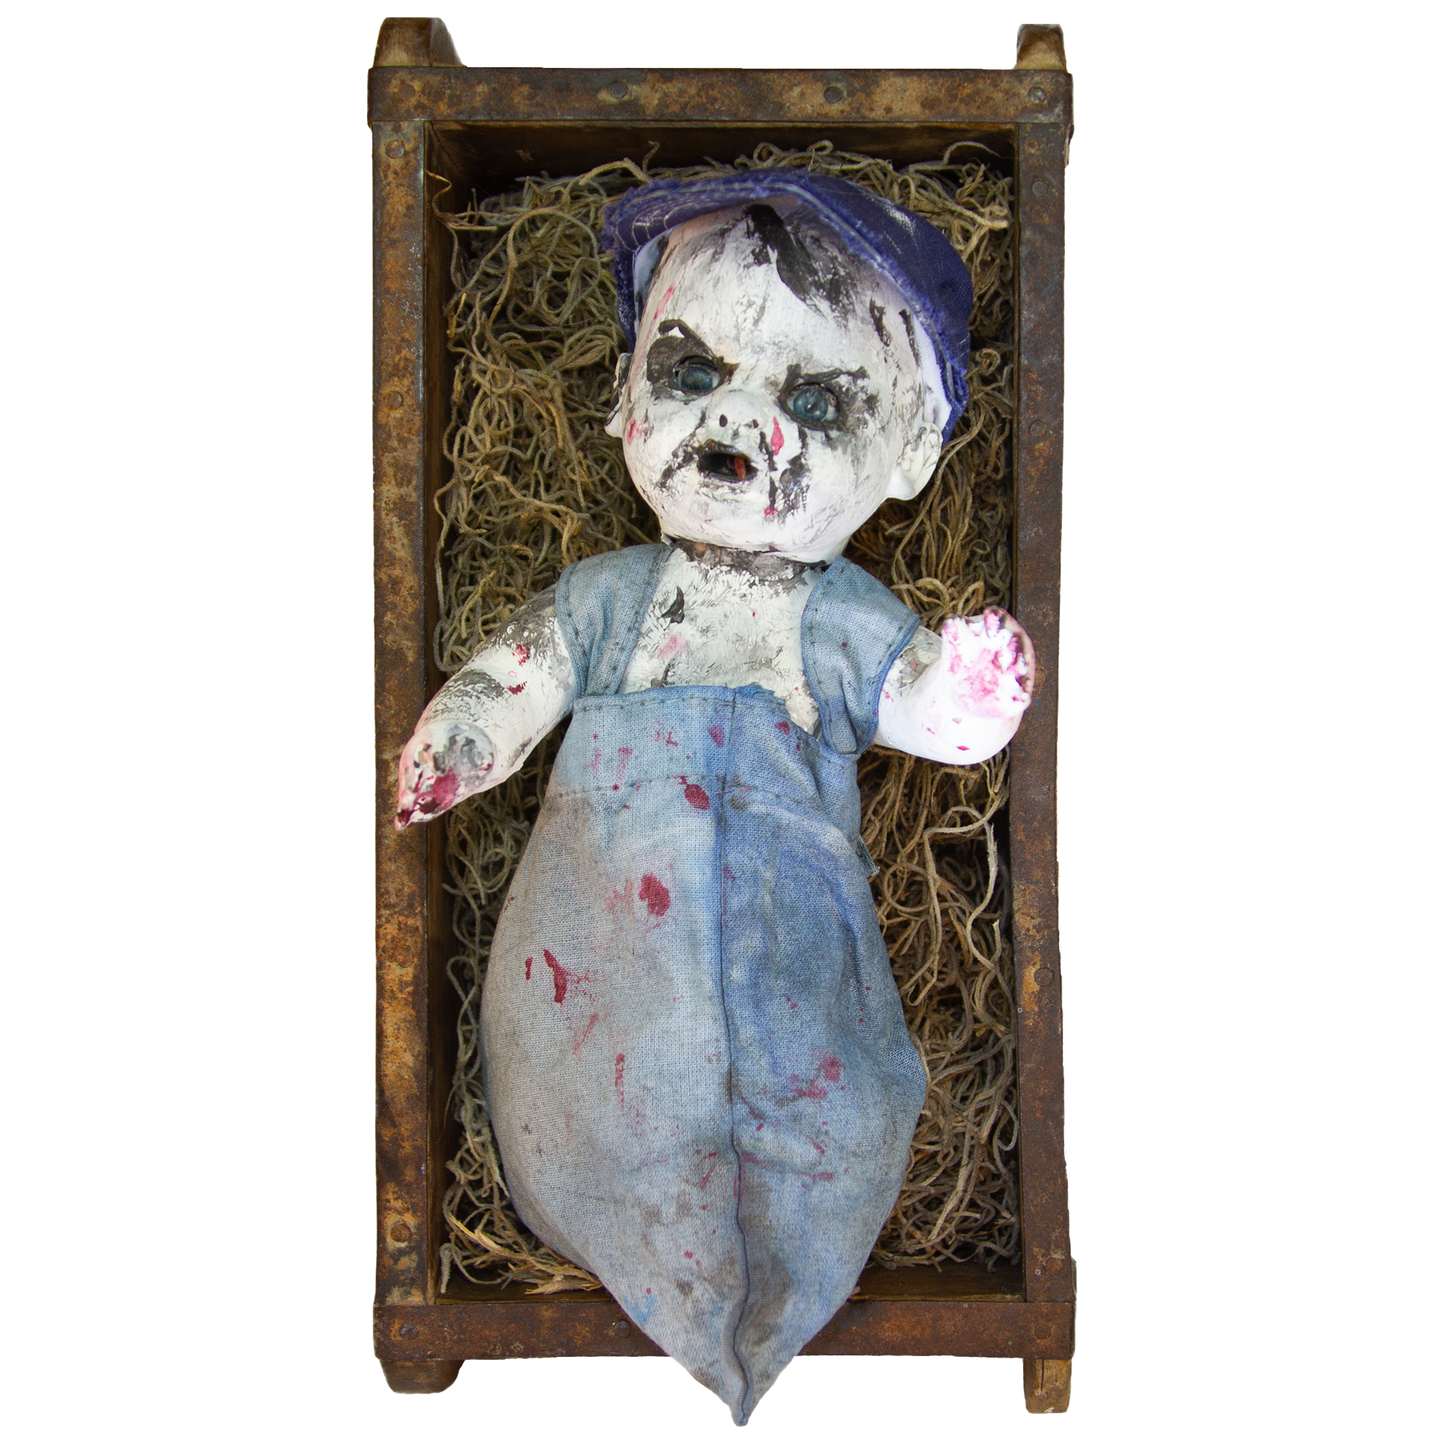 Horror Icon Bill Oberst Jr. Limited Edition™ Backwoods Baby Small in Antique Wood Display Case 11"x 5.5"x 3.5" Raw Brass Plate, Display Stand (Limited Edition of 6, each OOAK, signed & numbered)